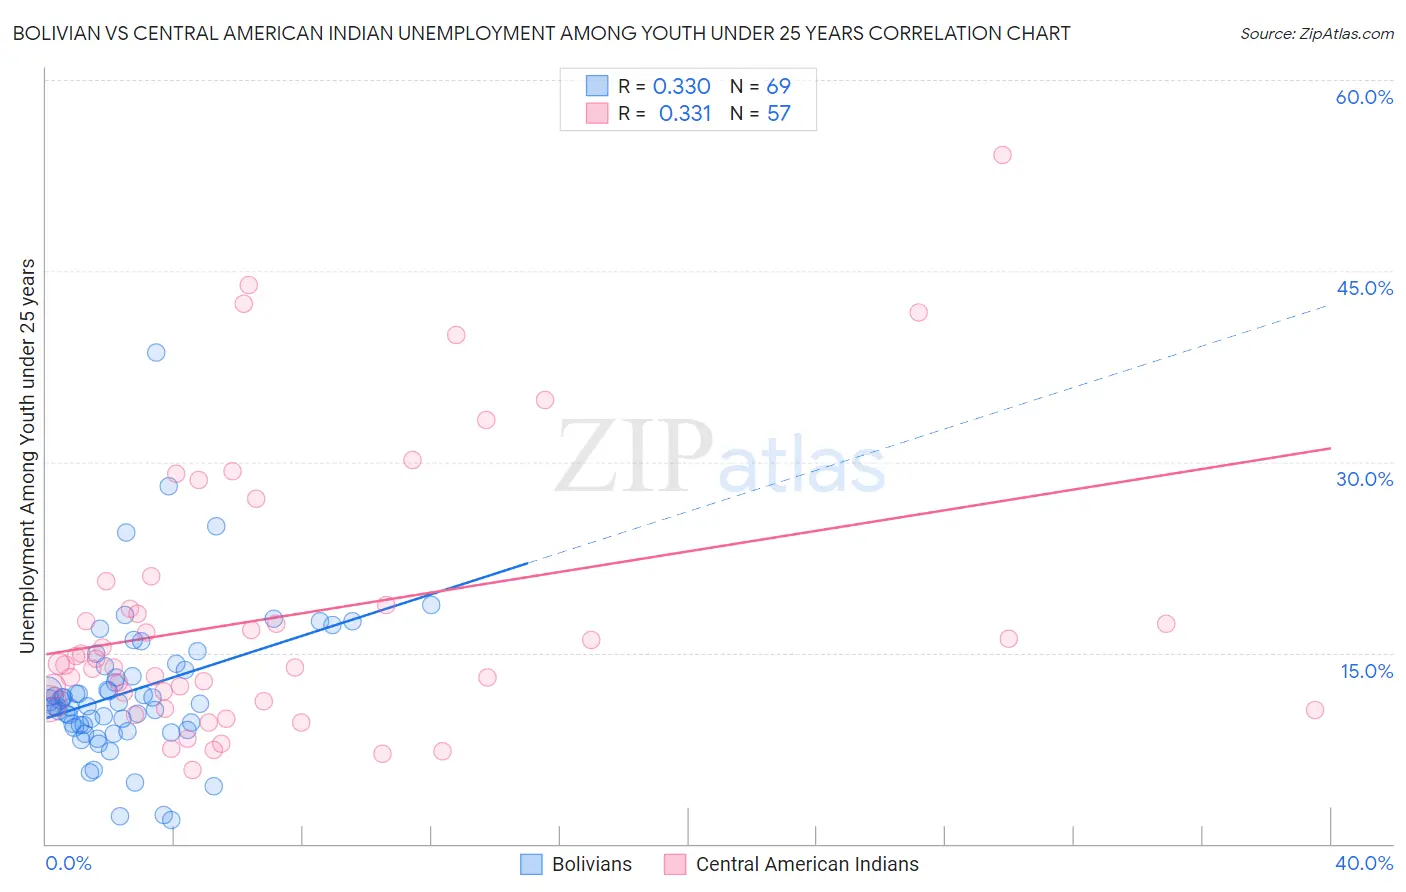 Bolivian vs Central American Indian Unemployment Among Youth under 25 years